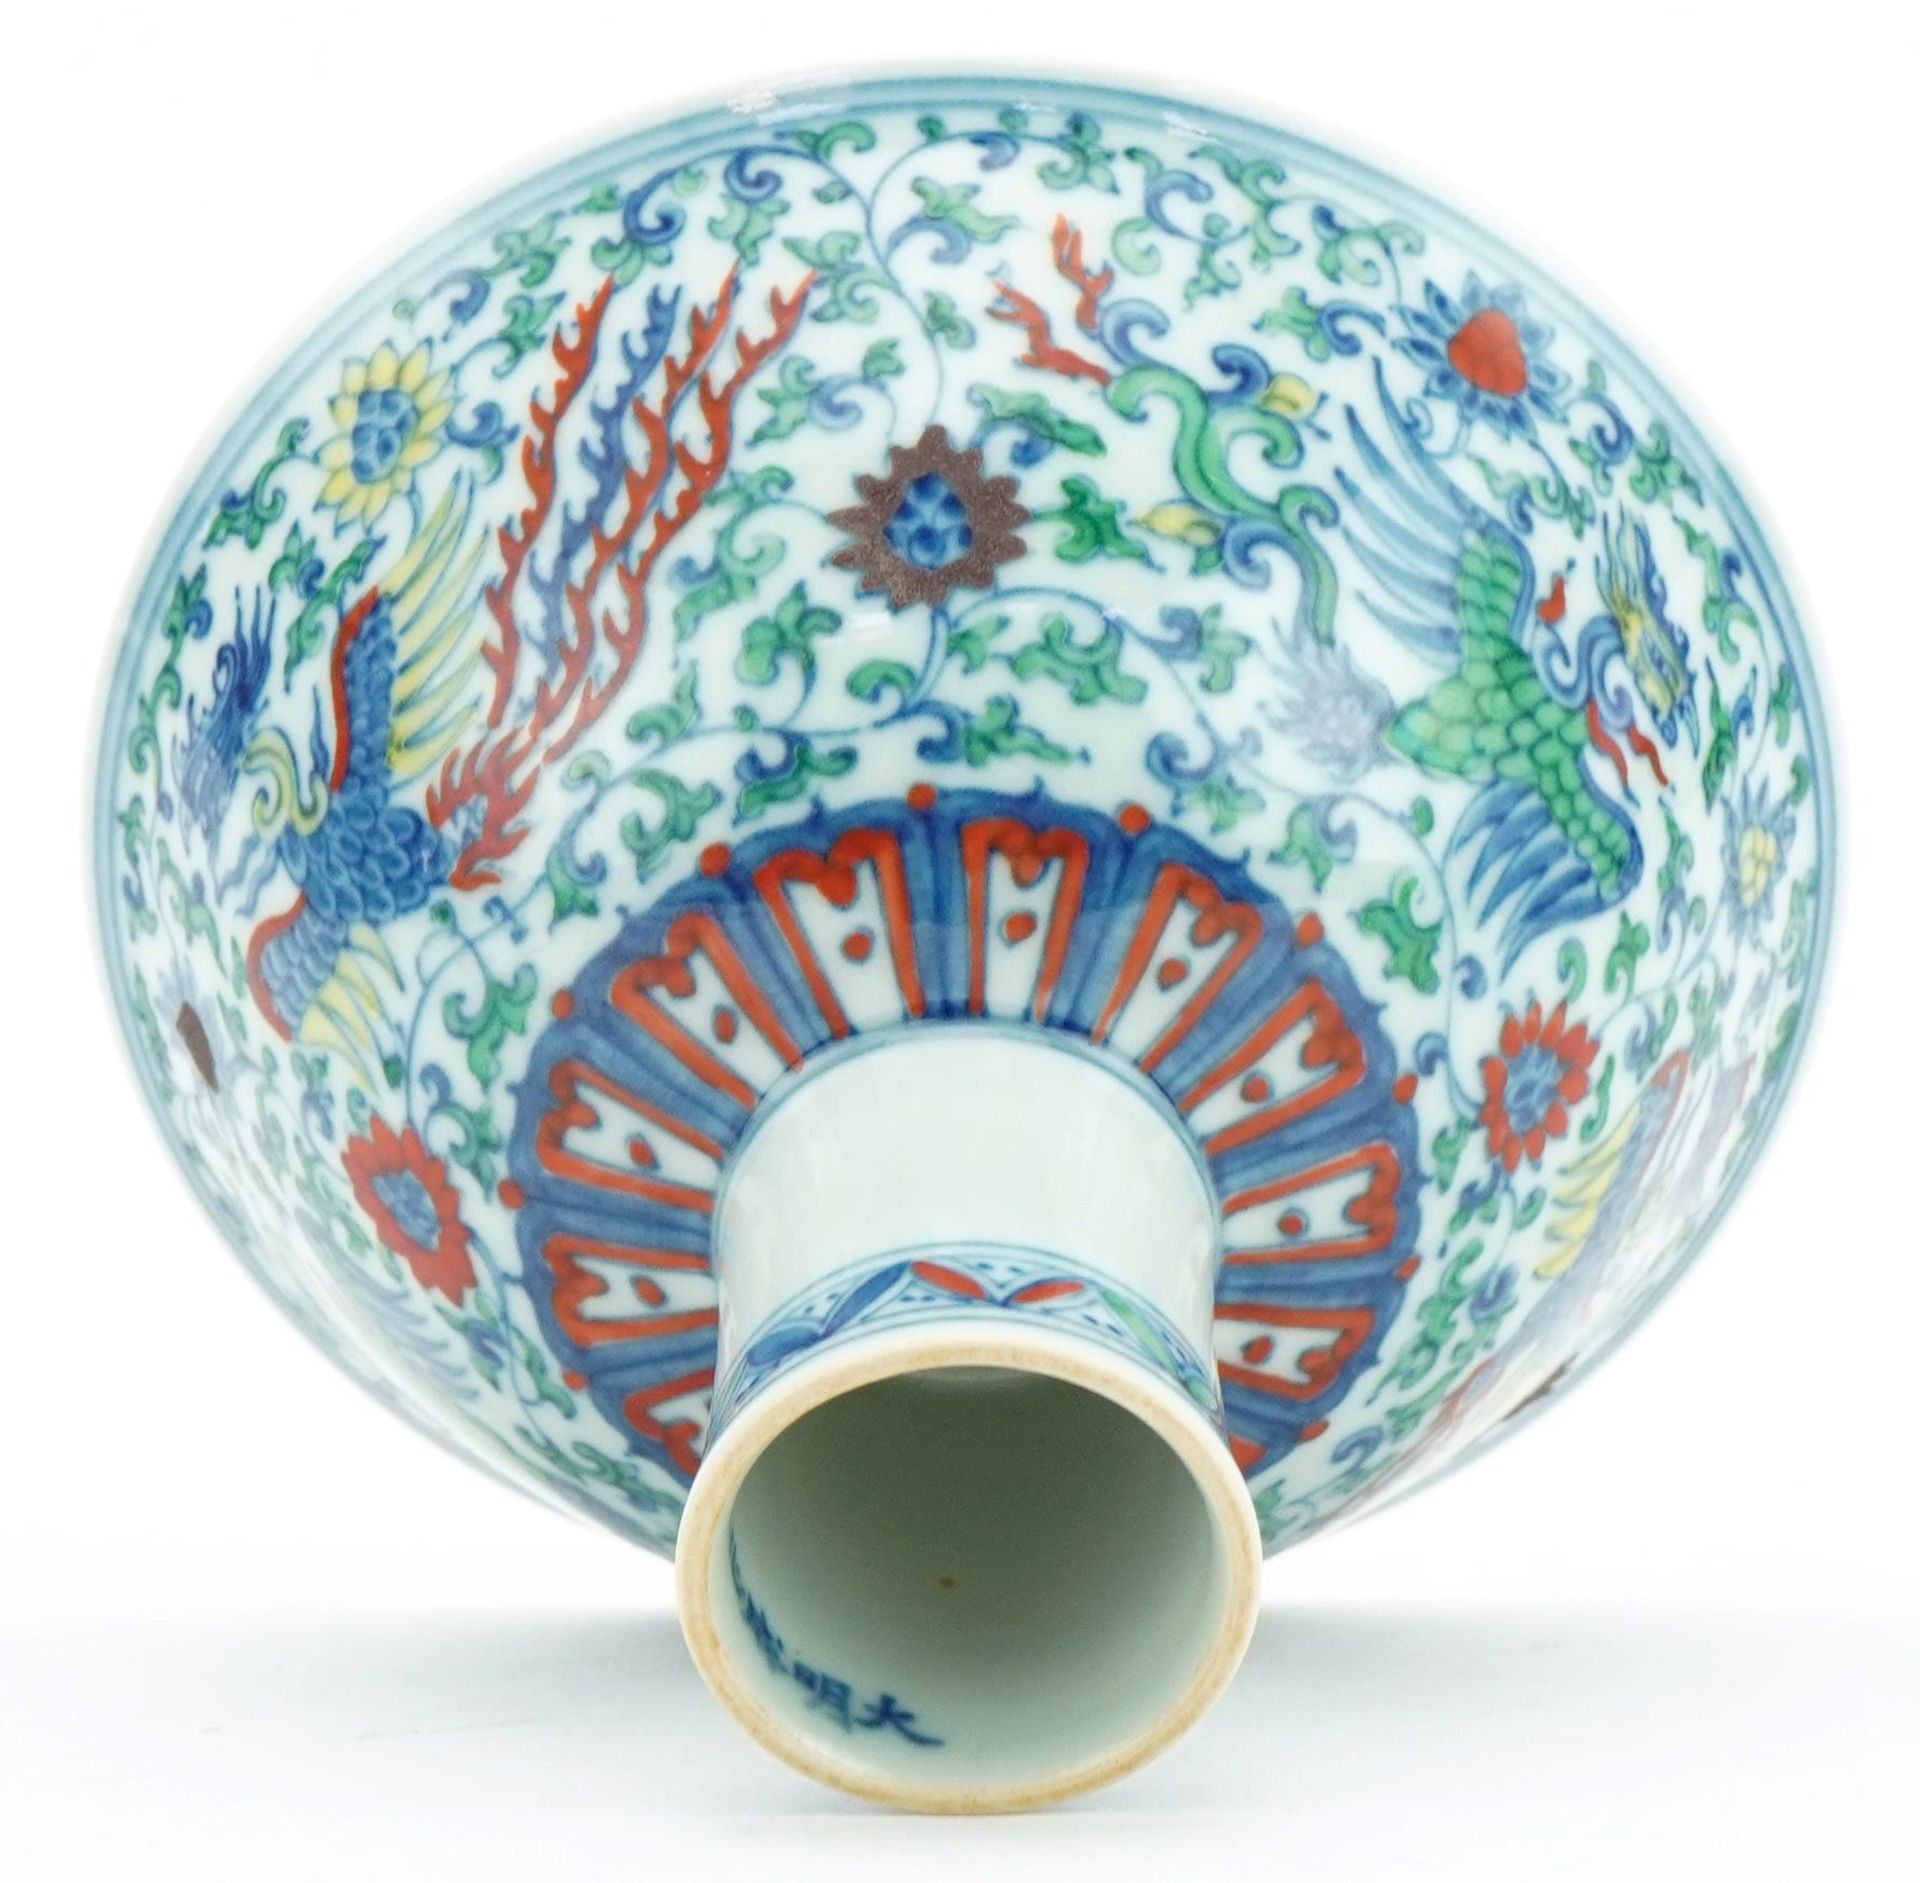 Chinese doucai porcelain stem bowl hand painted with phoenixes amongst flowers, six figure character - Image 6 of 7